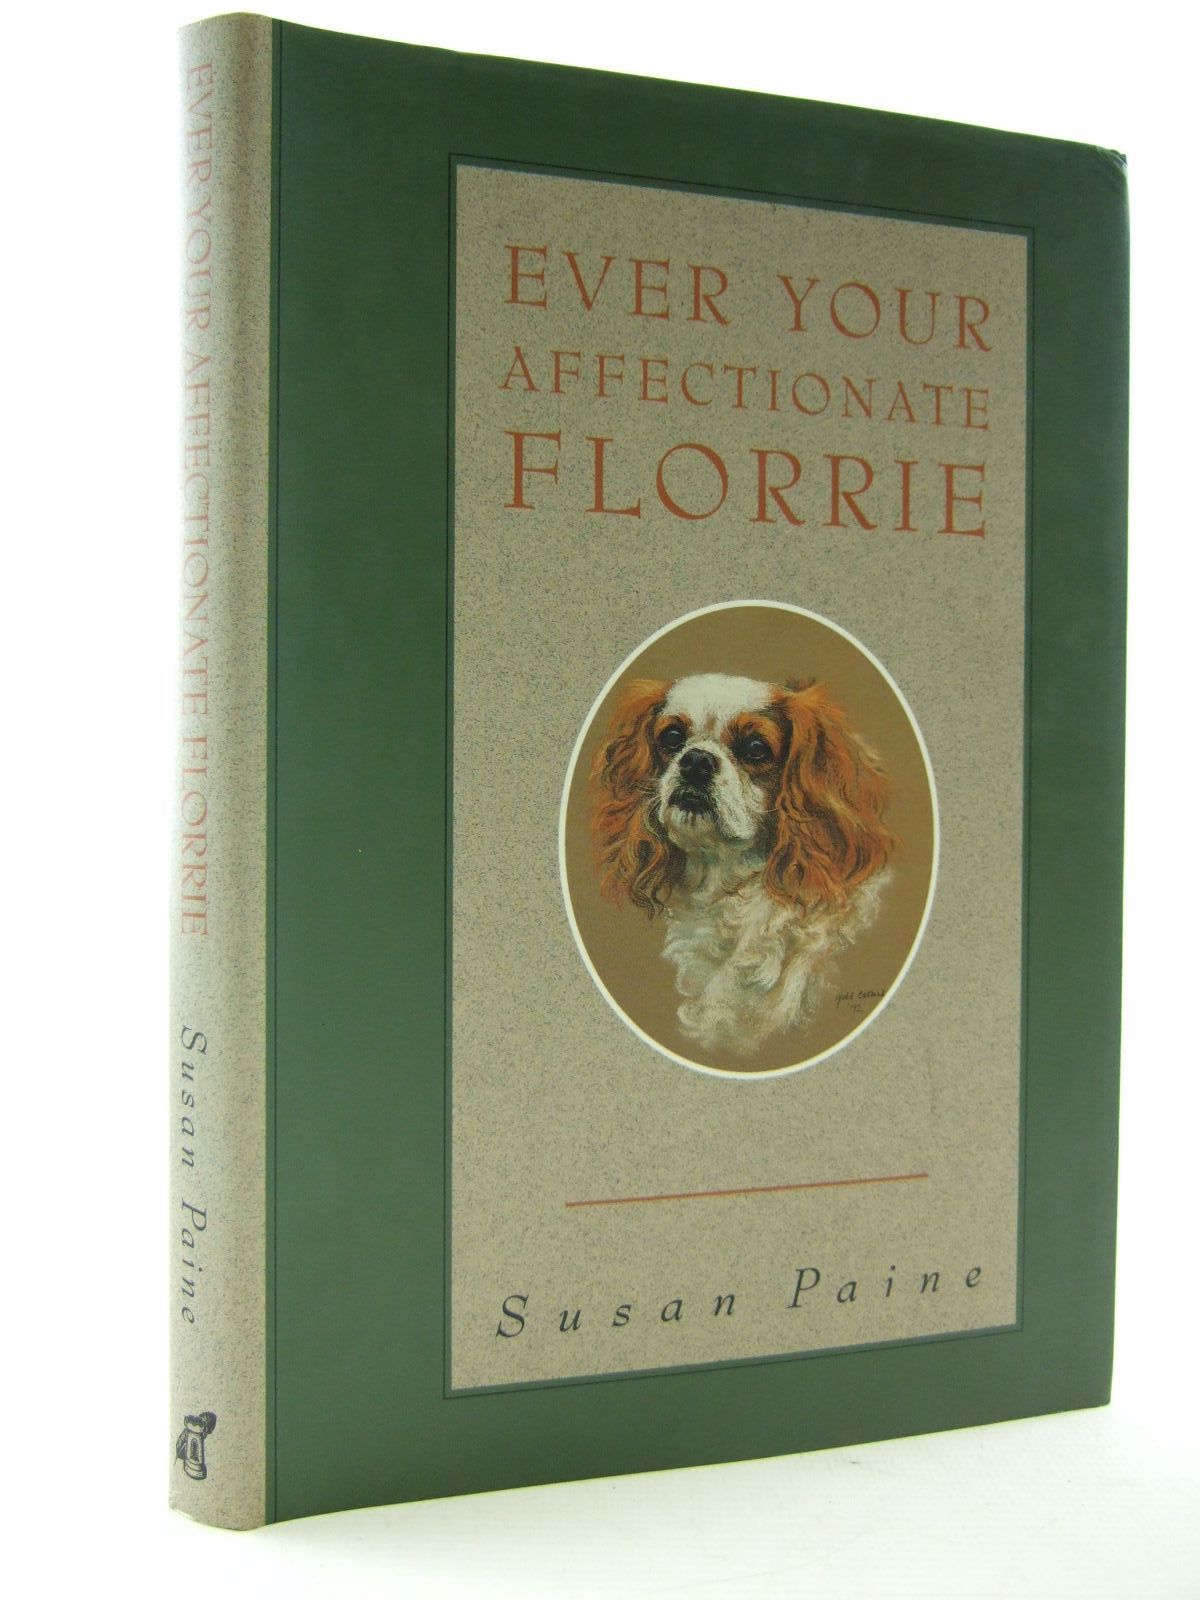 Photo of EVER YOUR AFFECTIONATE FLORRIE written by Paine, Susan illustrated by Evans, Gill published by Turret Books (STOCK CODE: 2108146)  for sale by Stella & Rose's Books